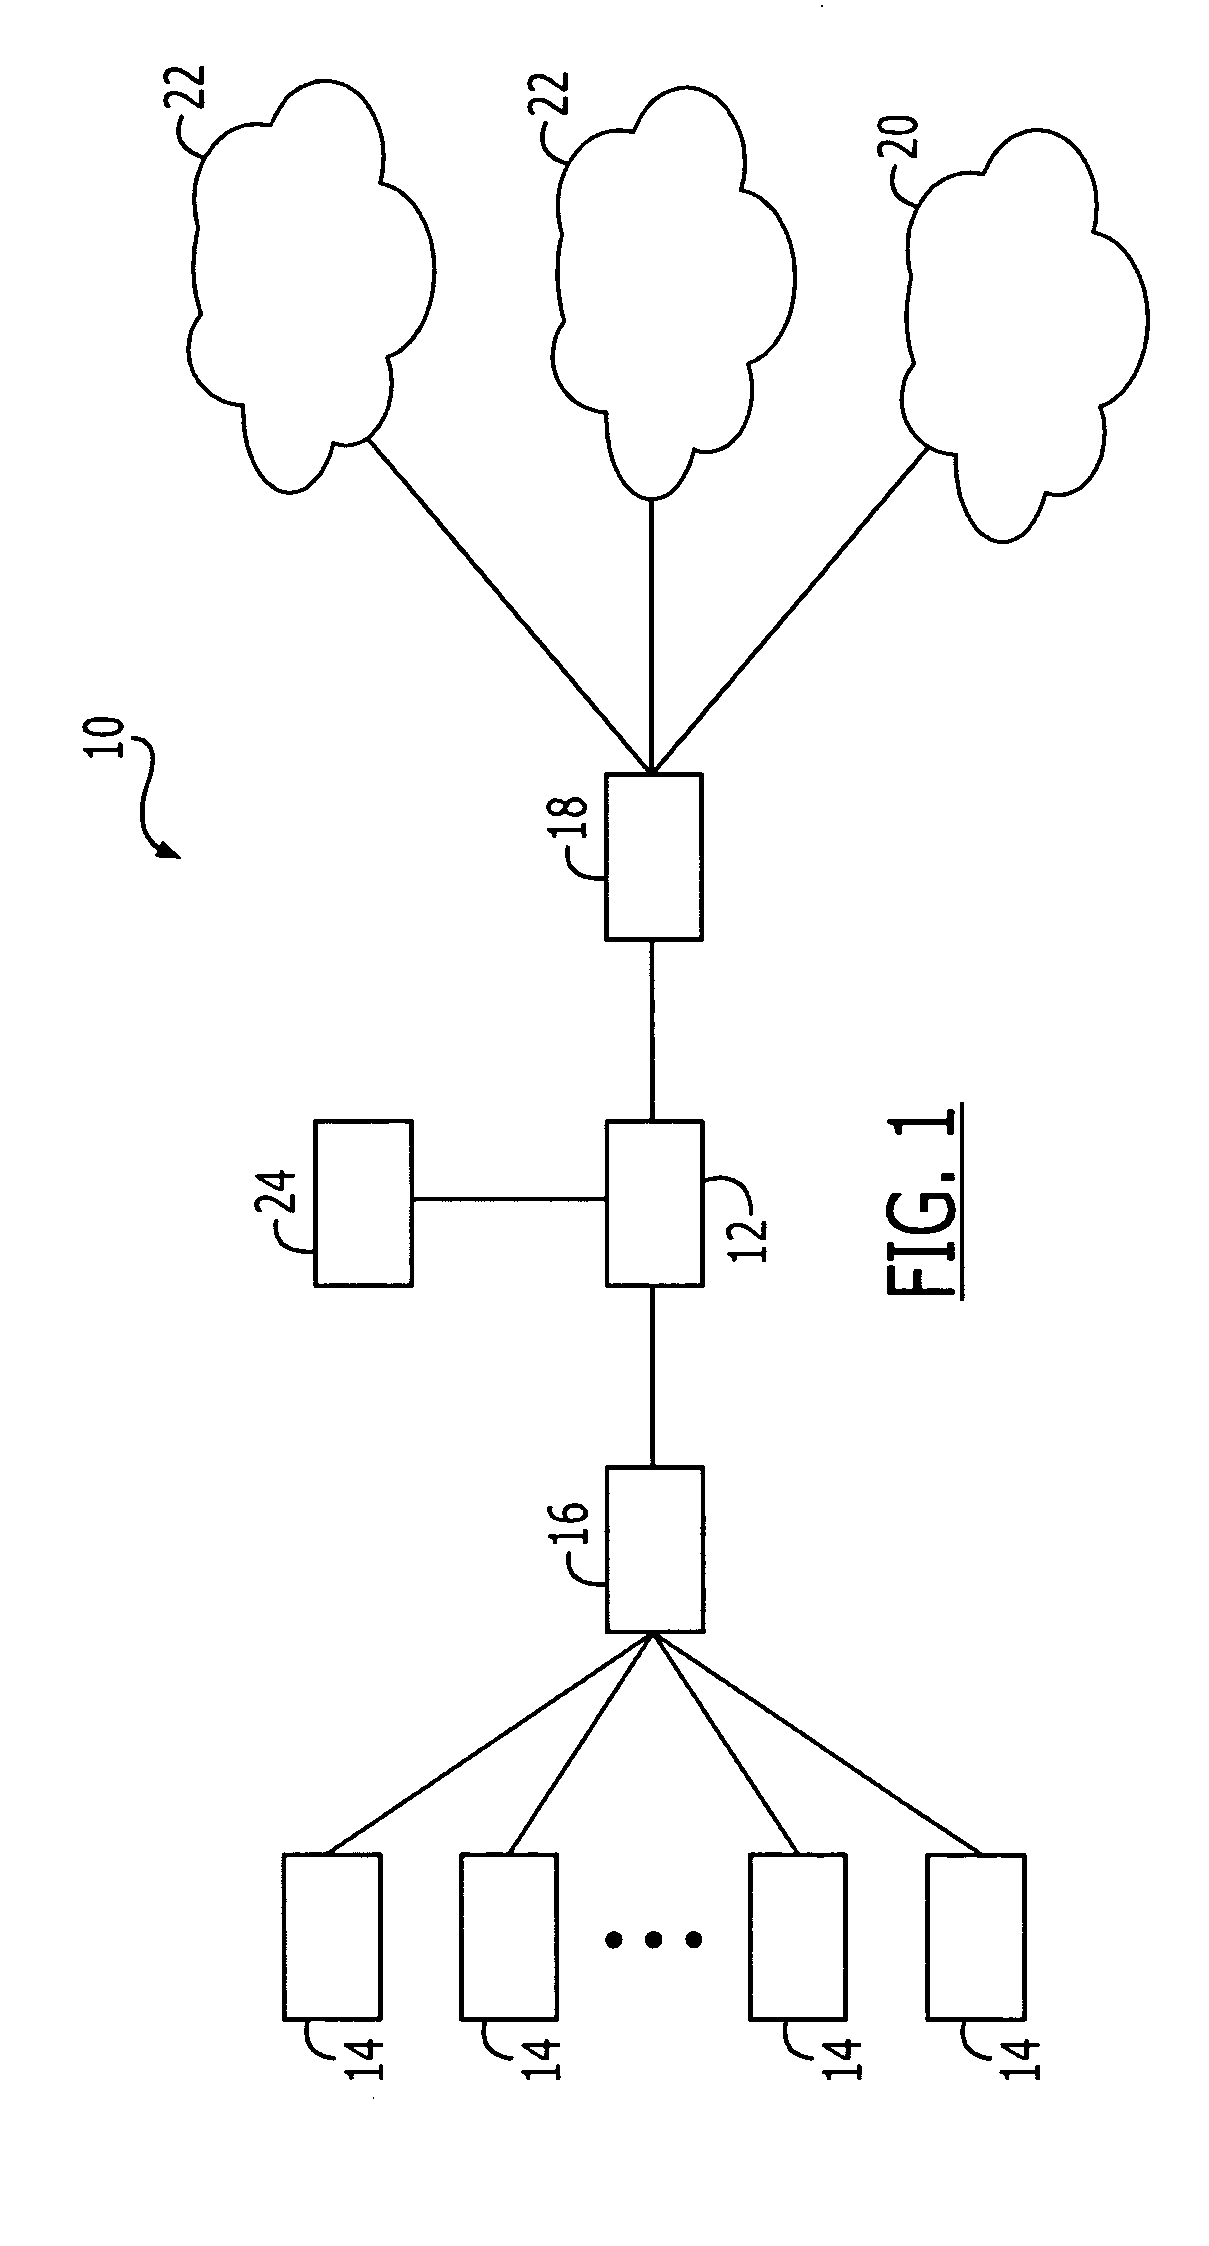 Method and apparatus for establishing dynamic tunnel access sessions in a communication network